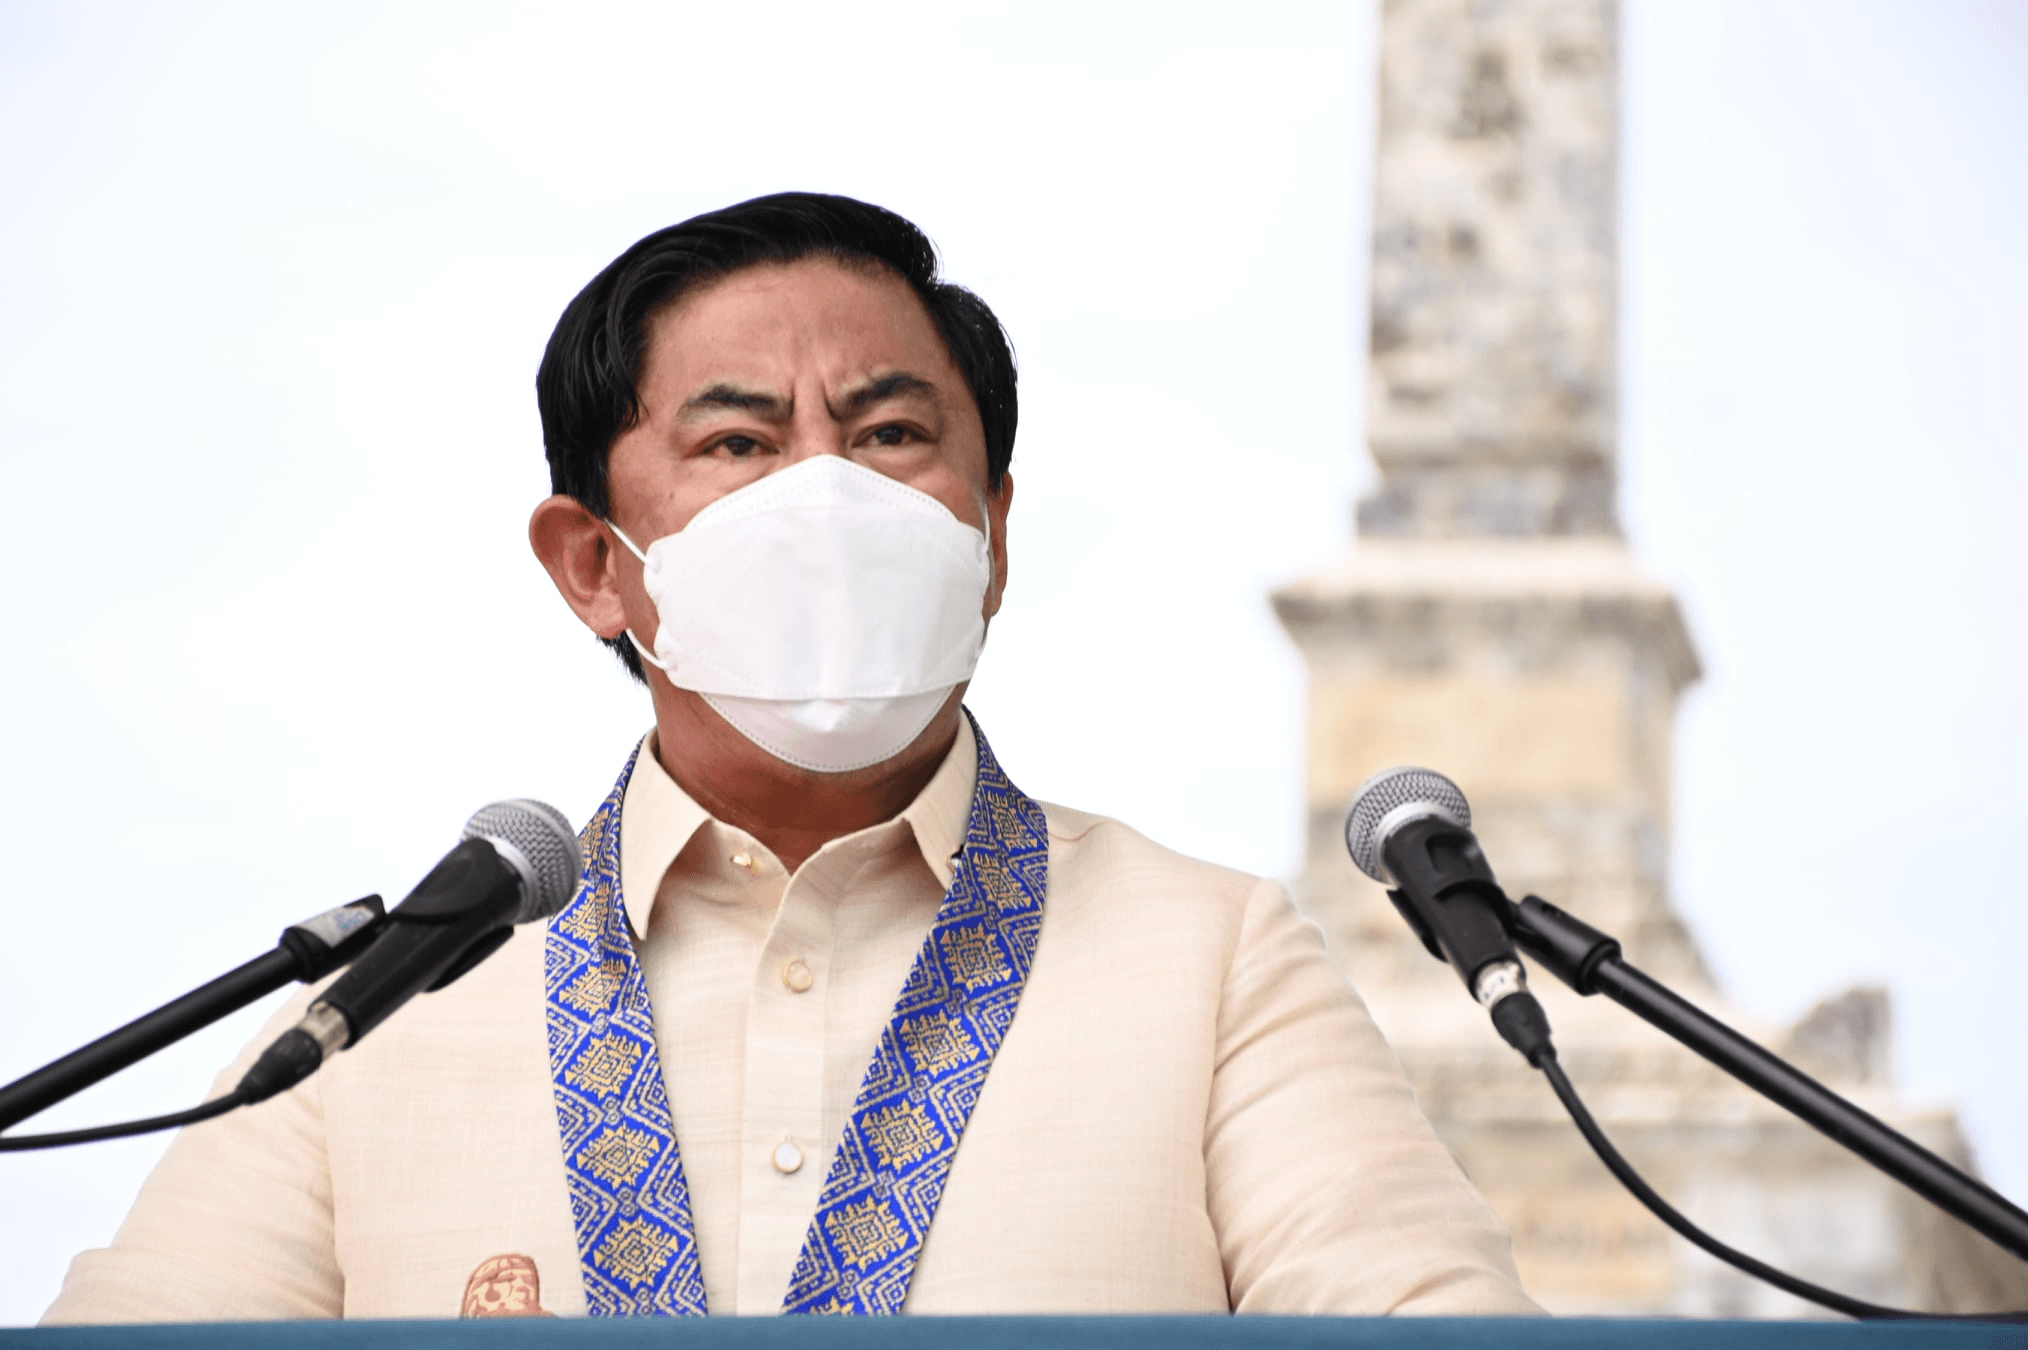 Mayor wants to allow entry of ‘fully vaccinated’ foreigners in Lapu-Lapu City